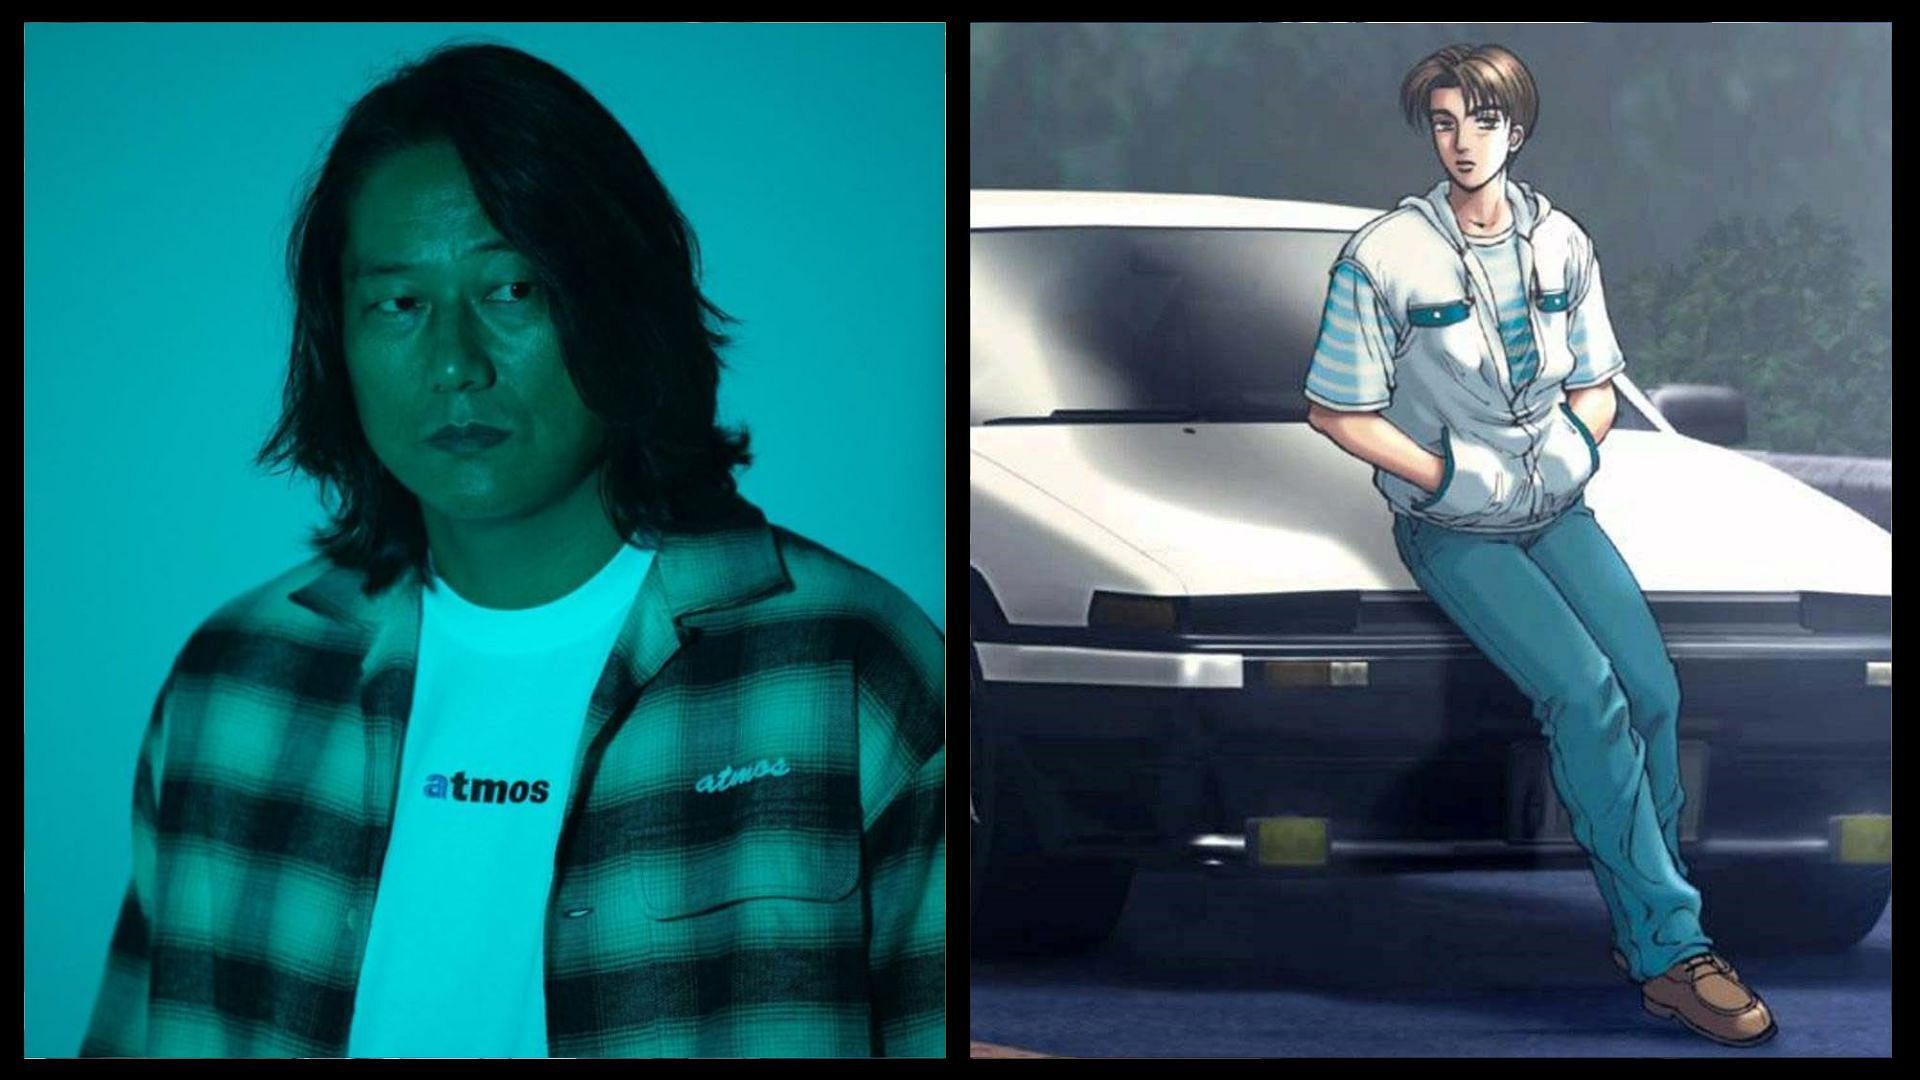 INITIAL D - Sung Kang is Taking the Driver's Seat of the Upcoming Film  Based on the Popular Manga and Arcade Game - The Illuminerdi